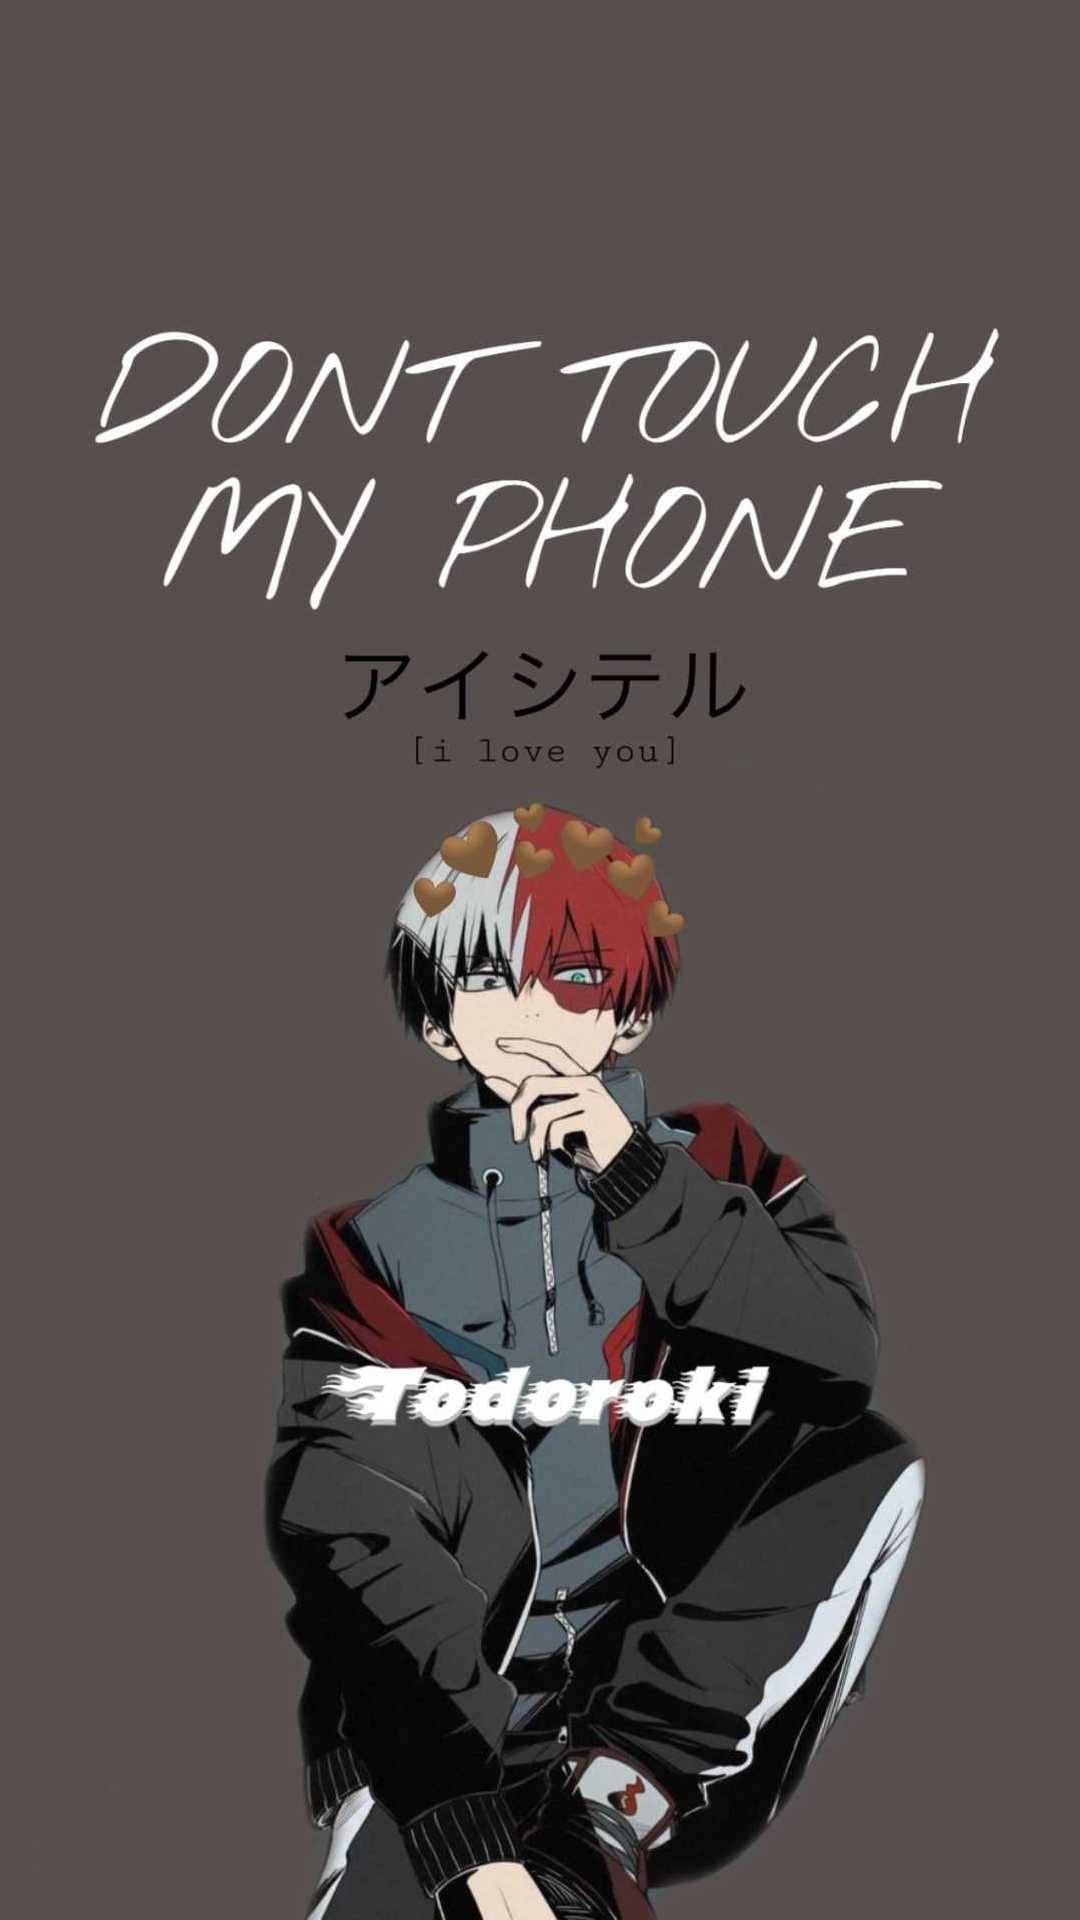 My Hero Academia iPhone Wallpaper with high-resolution 1080x1920 pixel. You can use this wallpaper for your iPhone 5, 6, 7, 8, X, XS, XR backgrounds, Mobile Screensaver, or iPad Lock Screen - My Hero Academia, Shoto Todoroki, peace